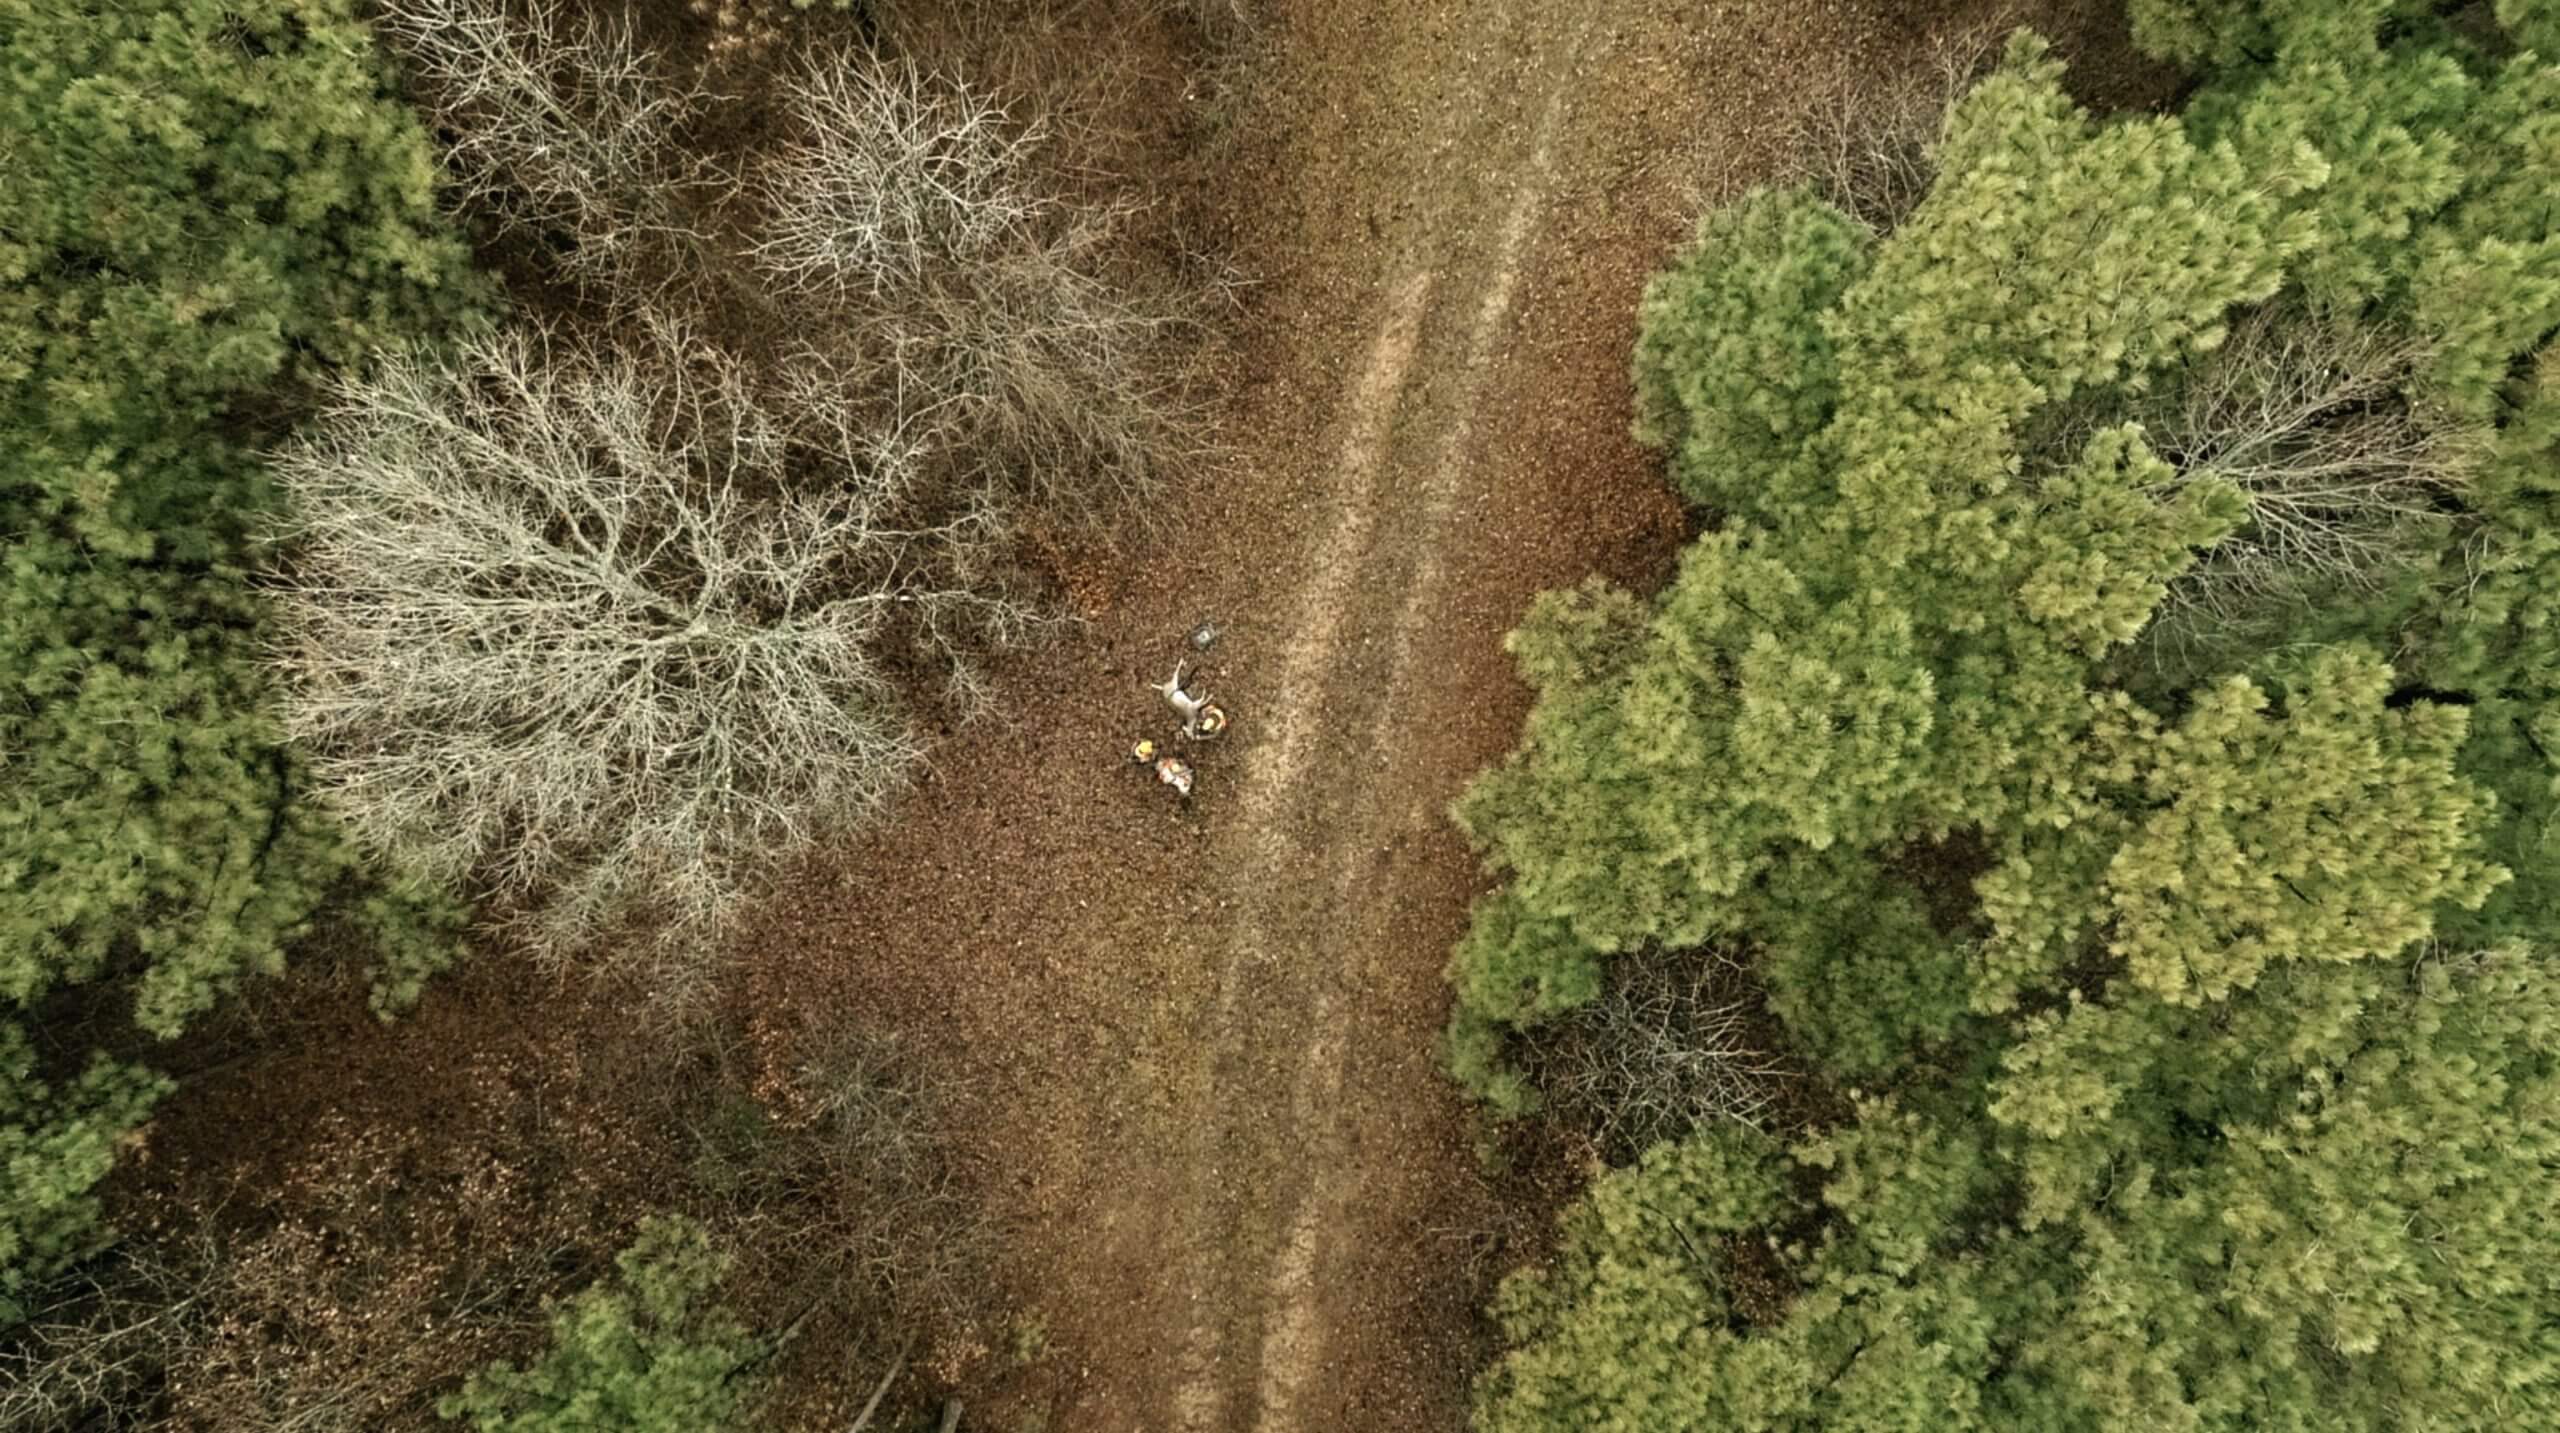 Still from One Shot One Kill. Birds eye view of three men standing and kneeling near a deer lying on the ground.